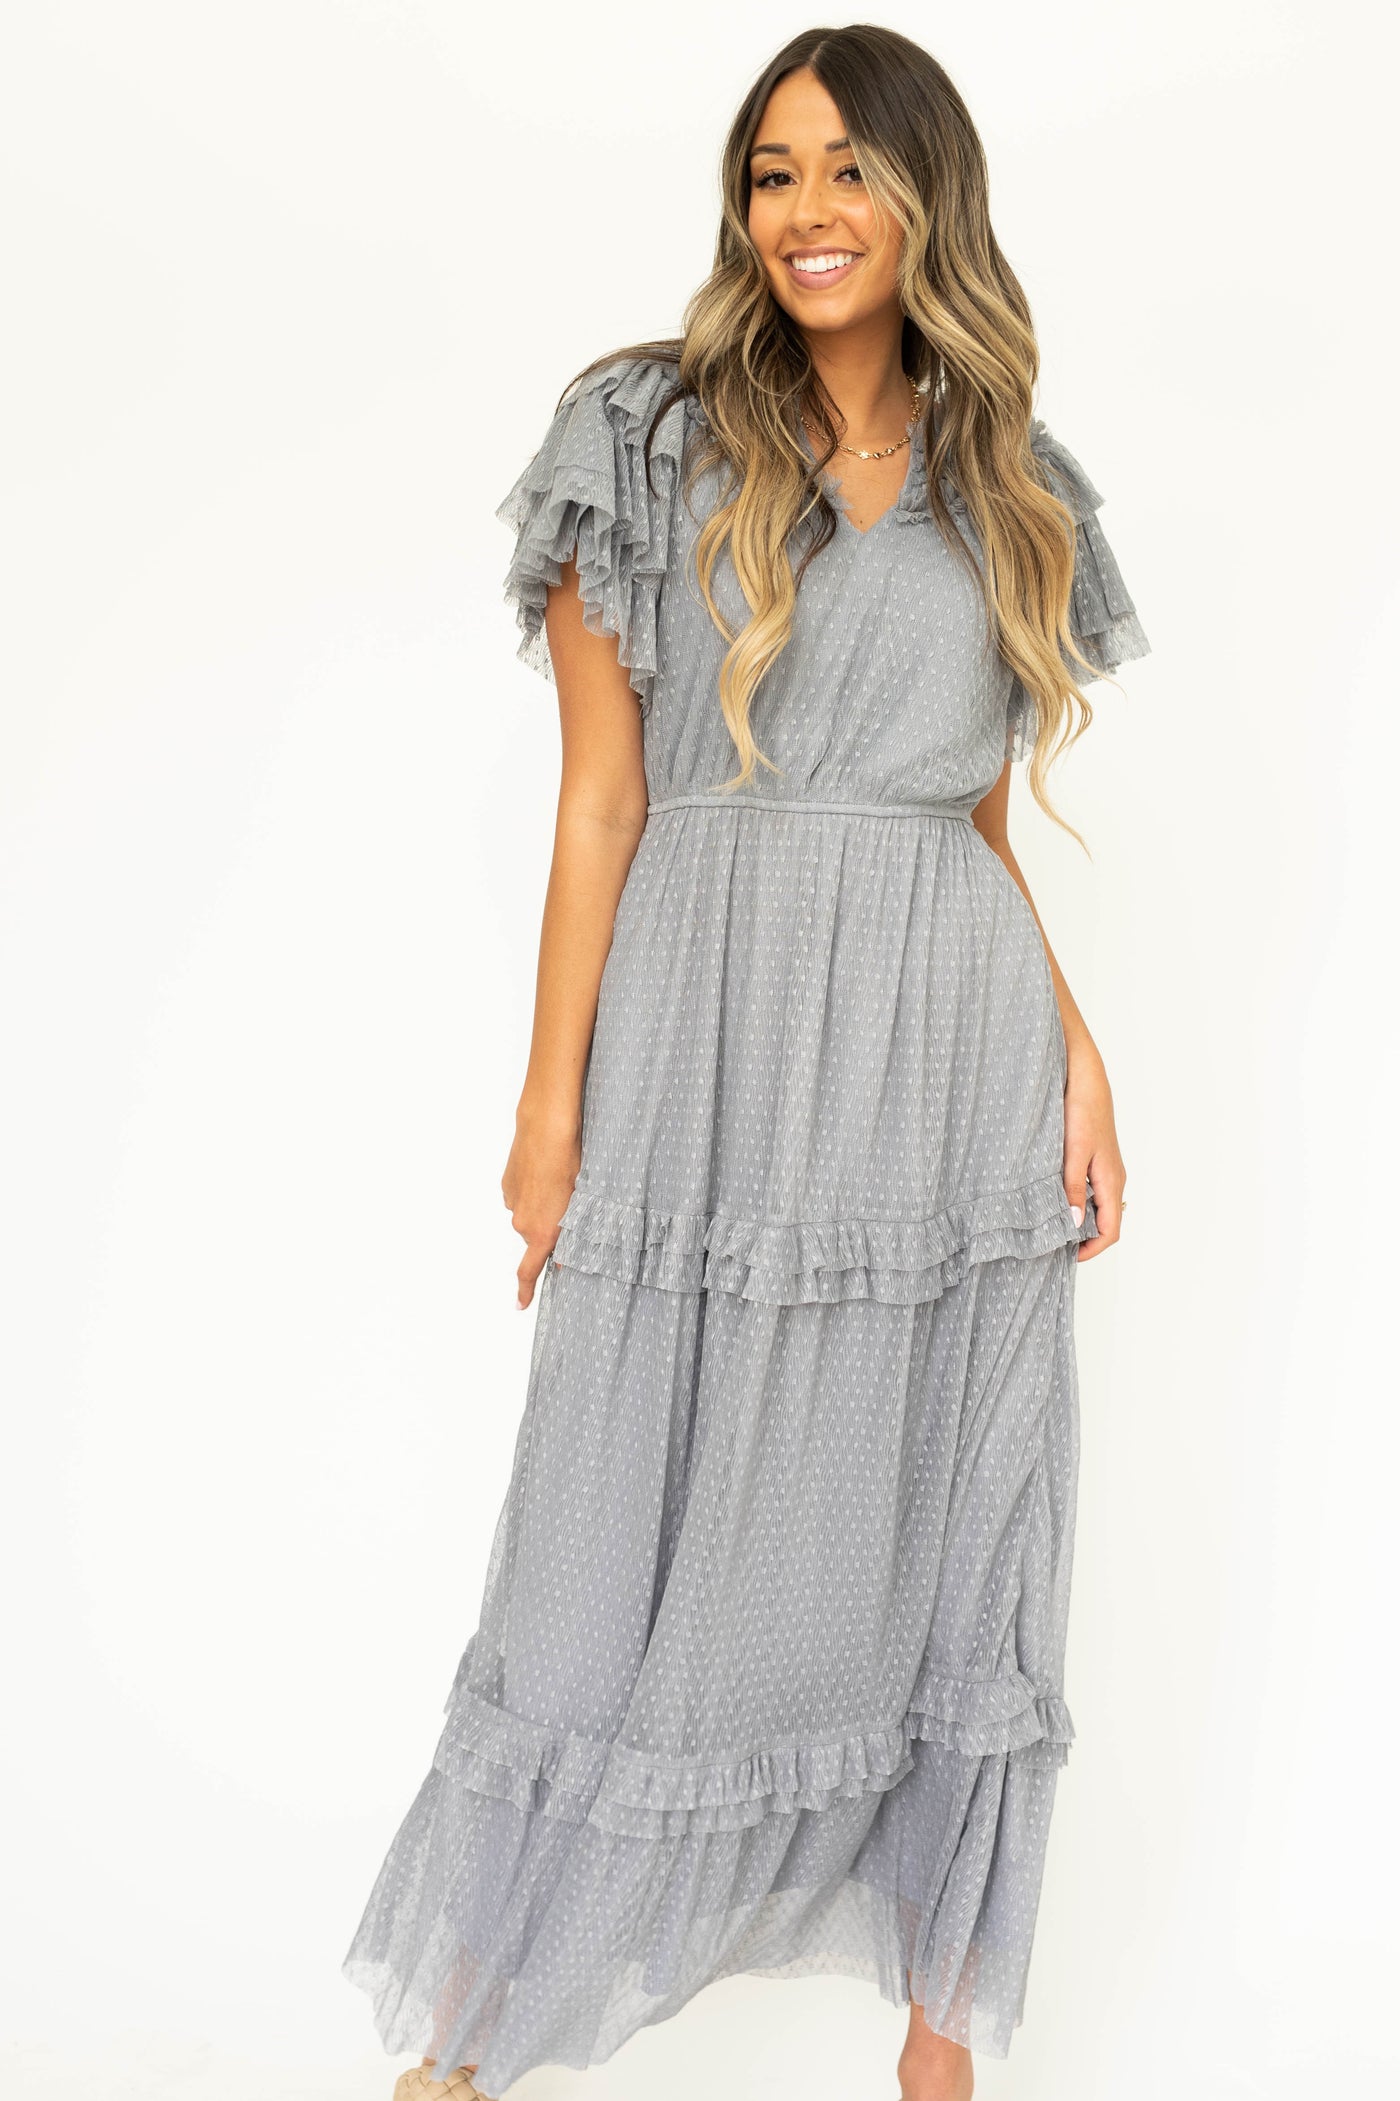 Blue gray lace short sleeve dress with ruffles on sleeves and neck.